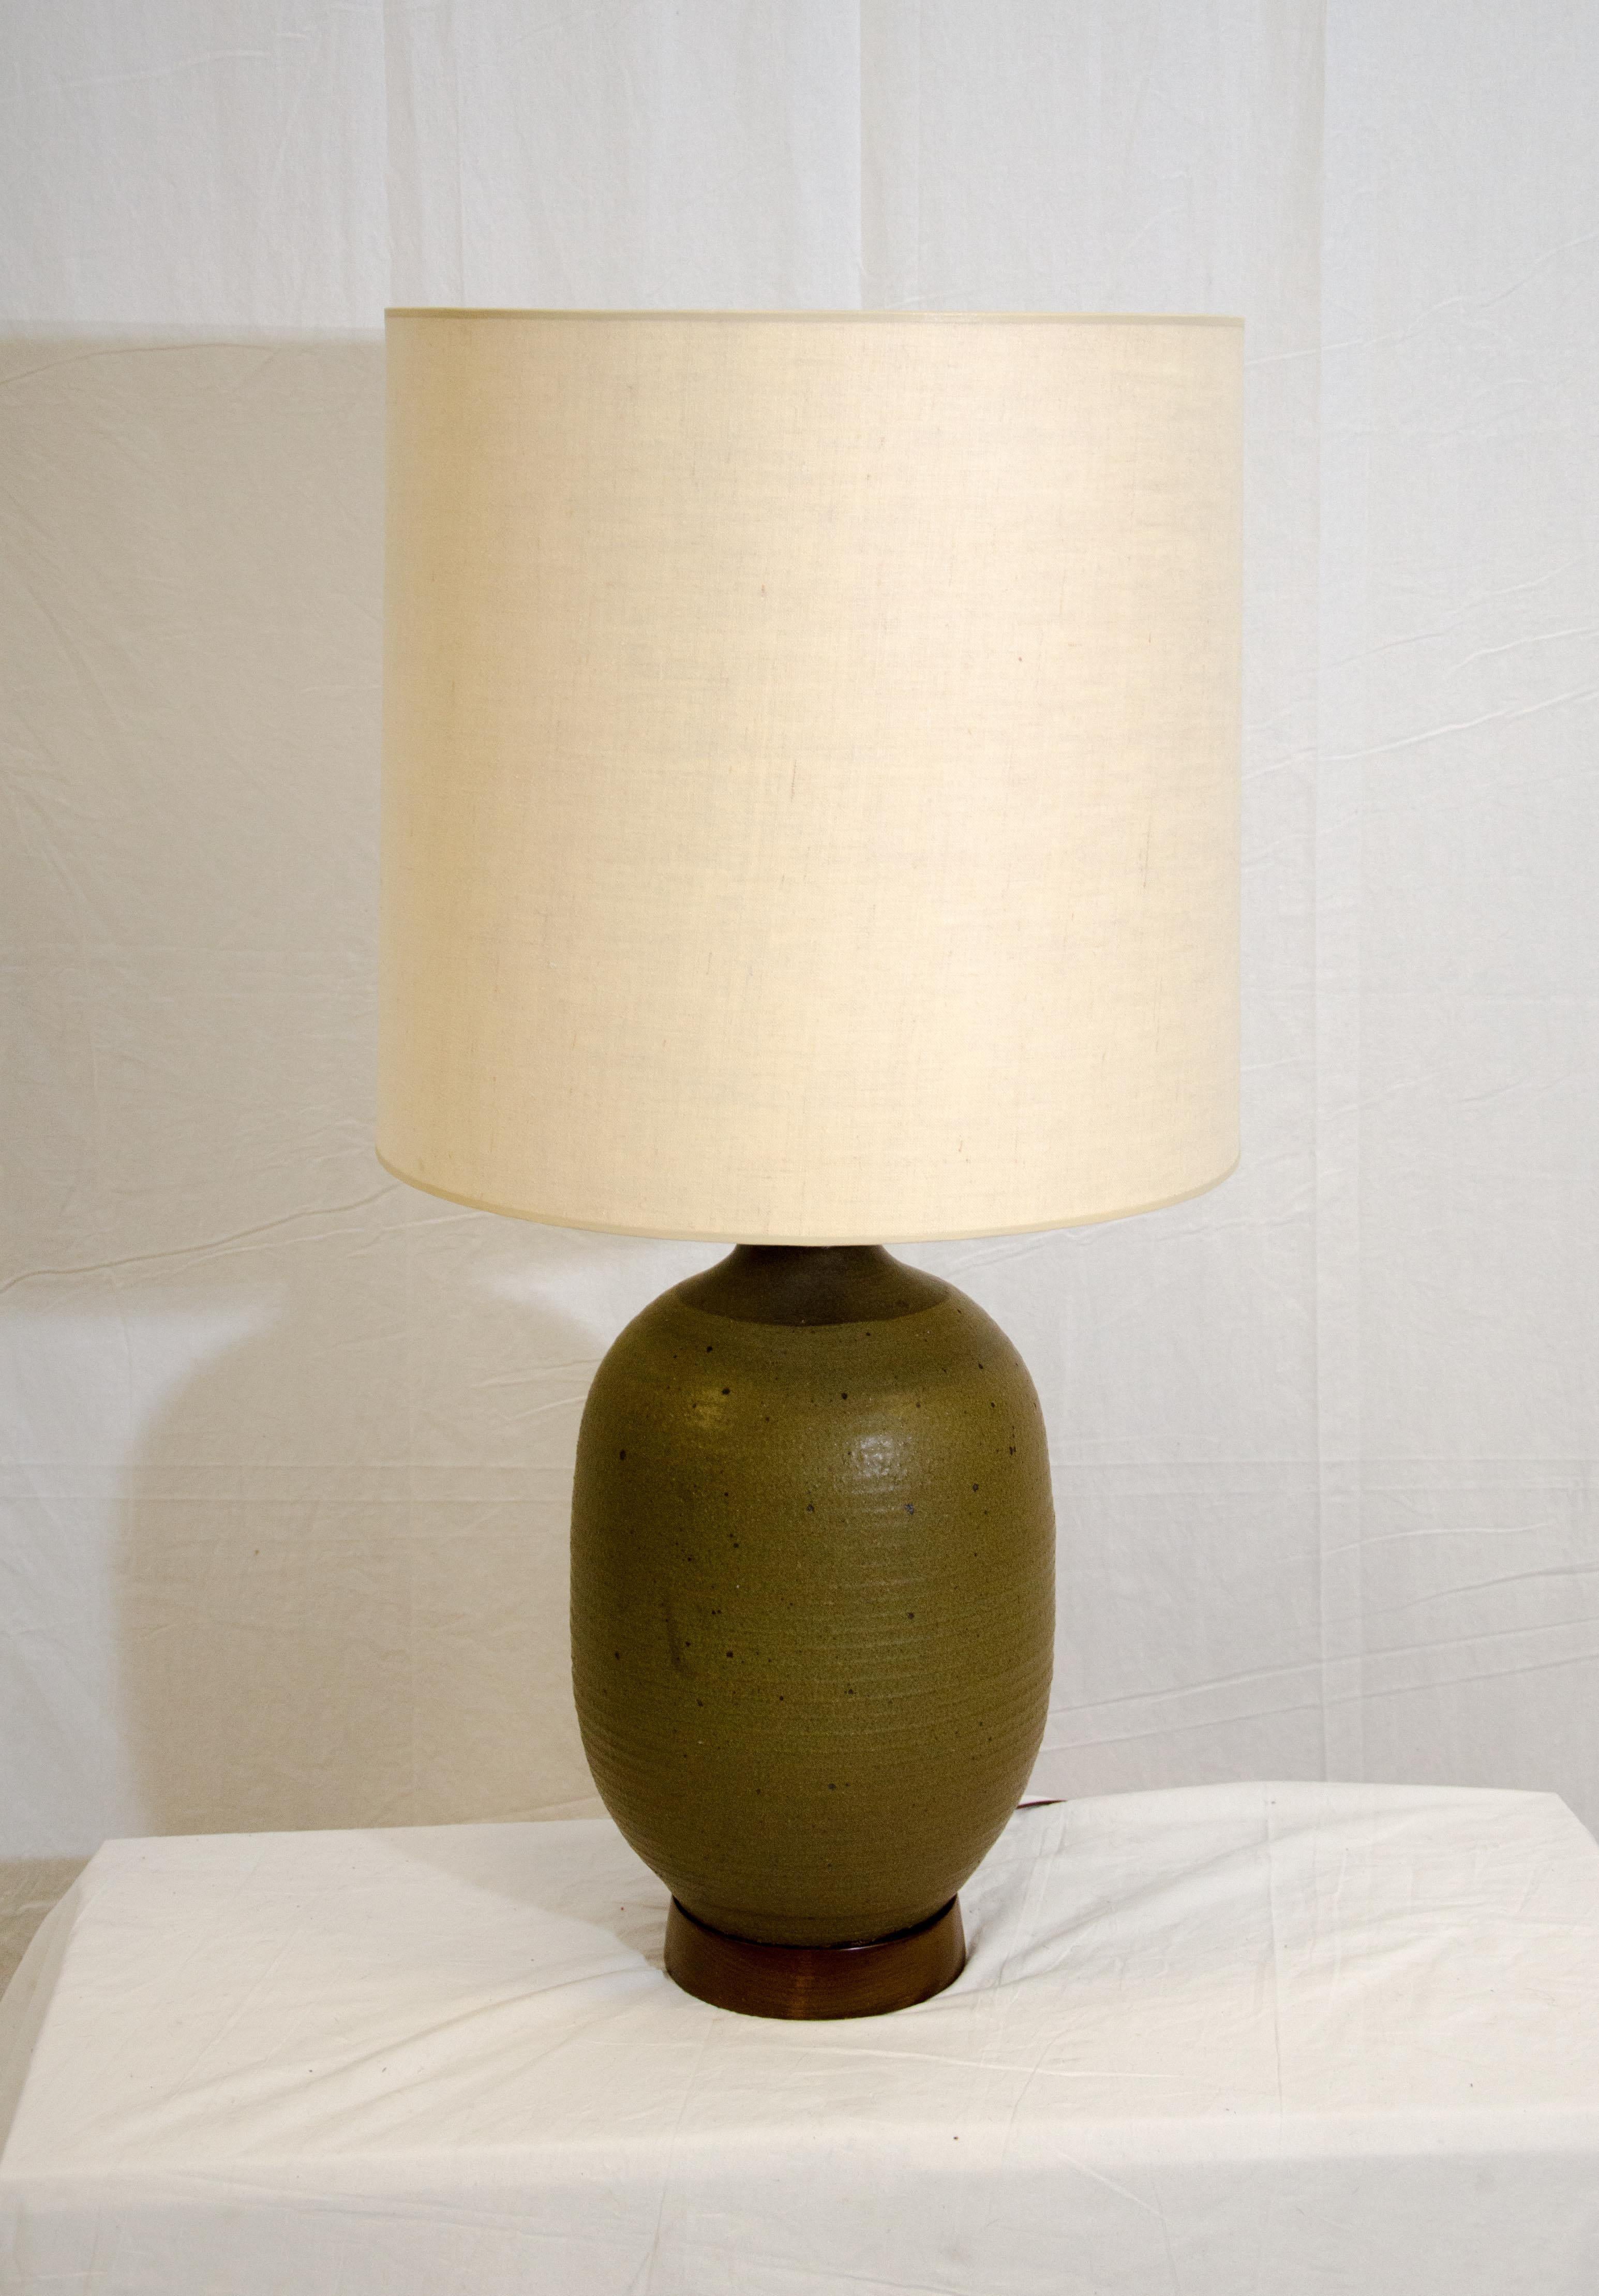 This large Studio Pottery lamp is a muted green color with random darker accent spots and has a ridged design to the whole base. There is a 2